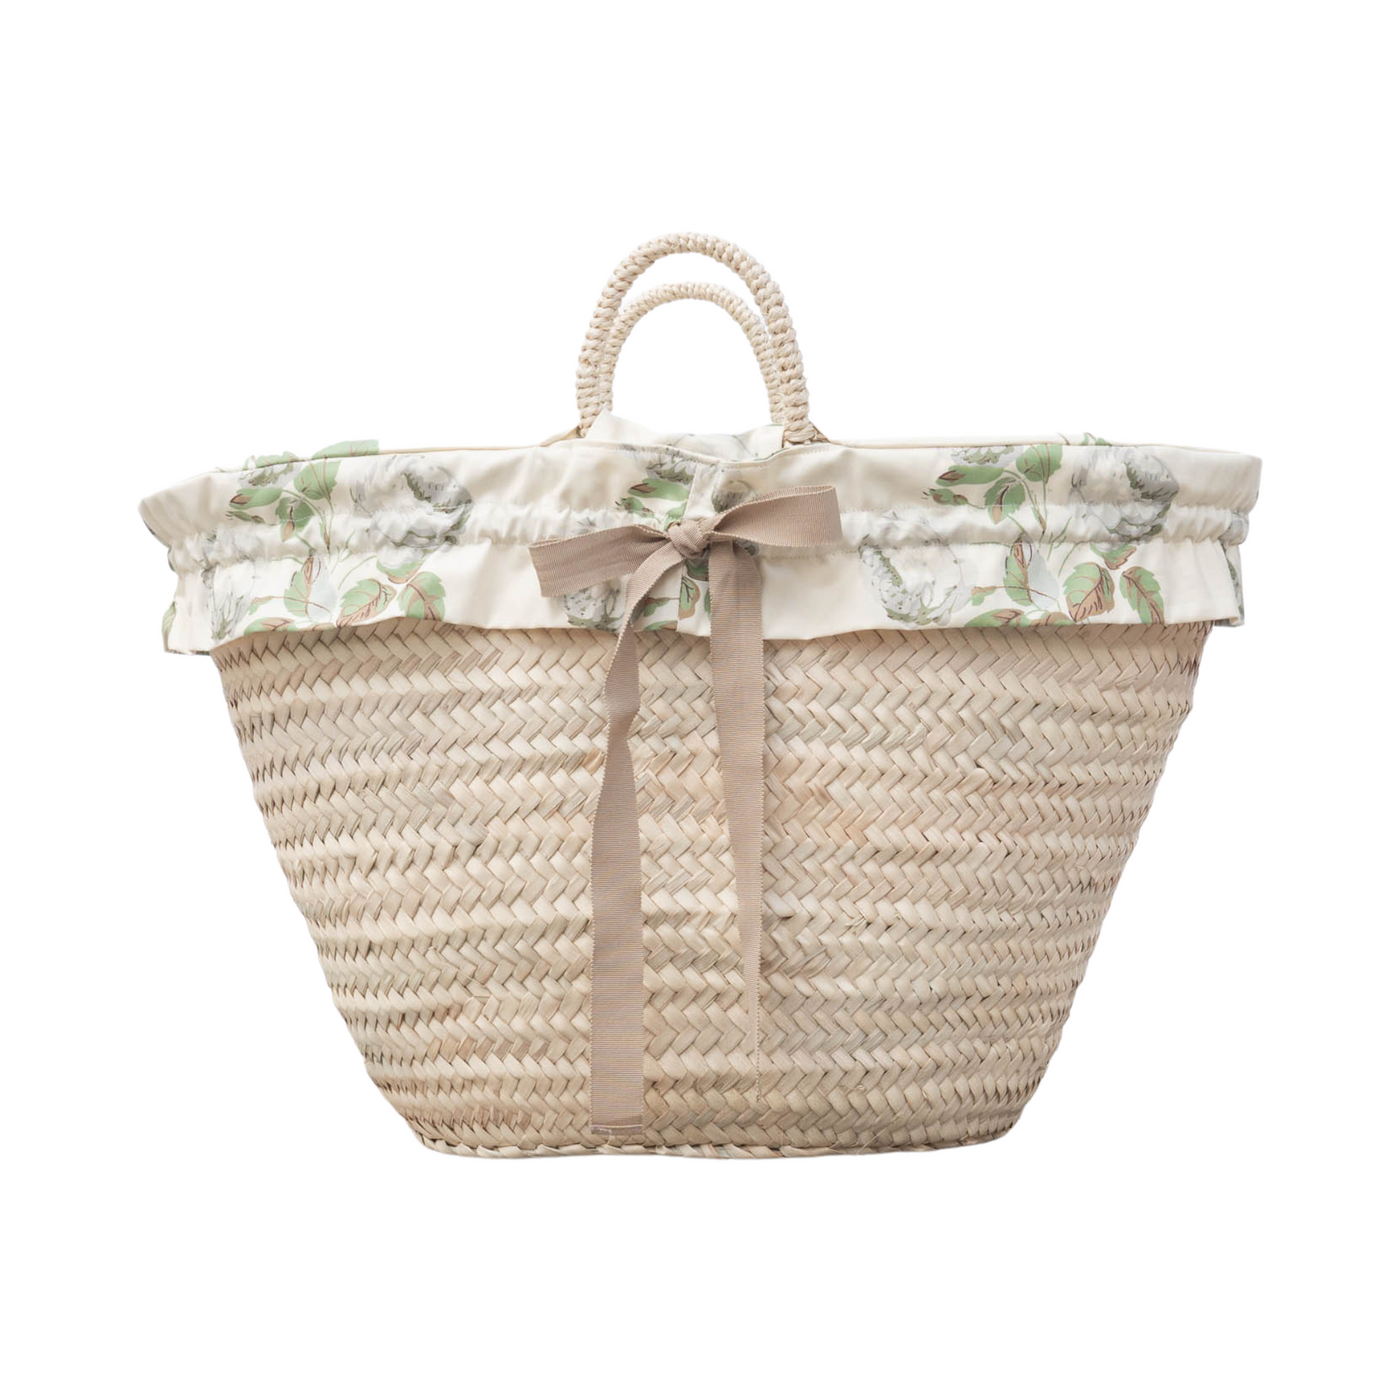 Colefax & Fowler Bowood Lined Market Basket - Maxine Makes